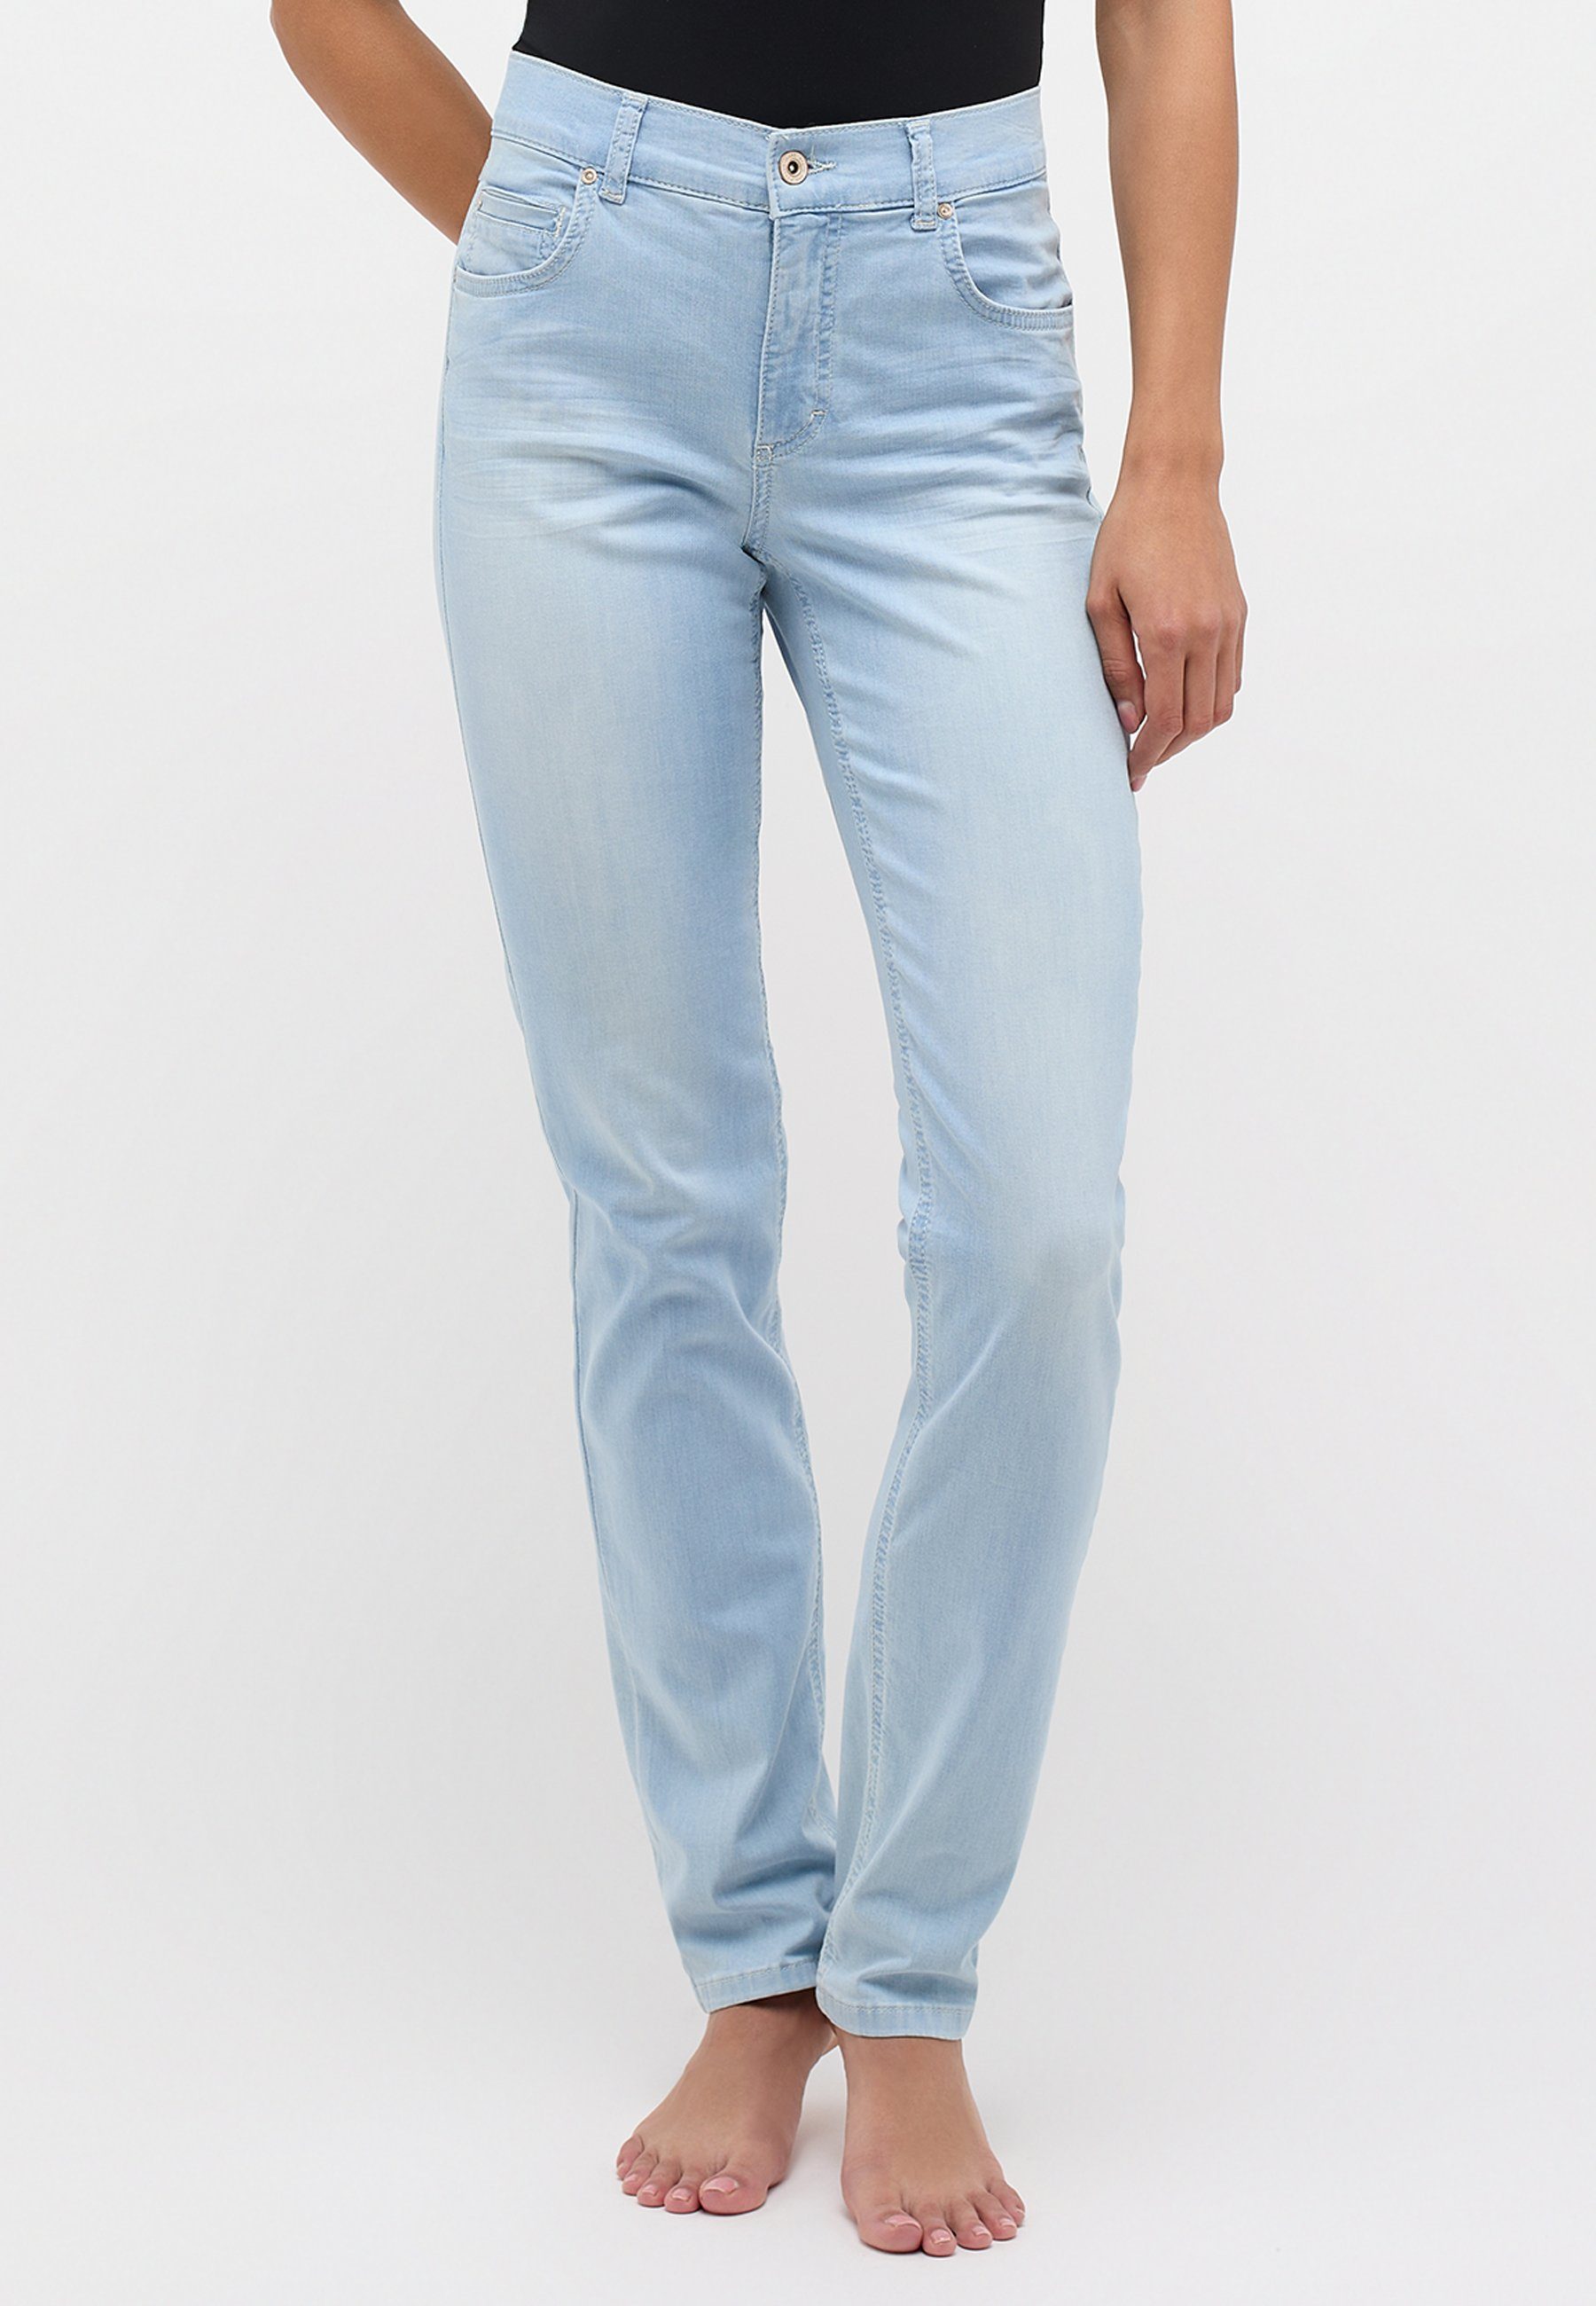 ANGELS Straight-Jeans CICI in Slim Fit-Passform